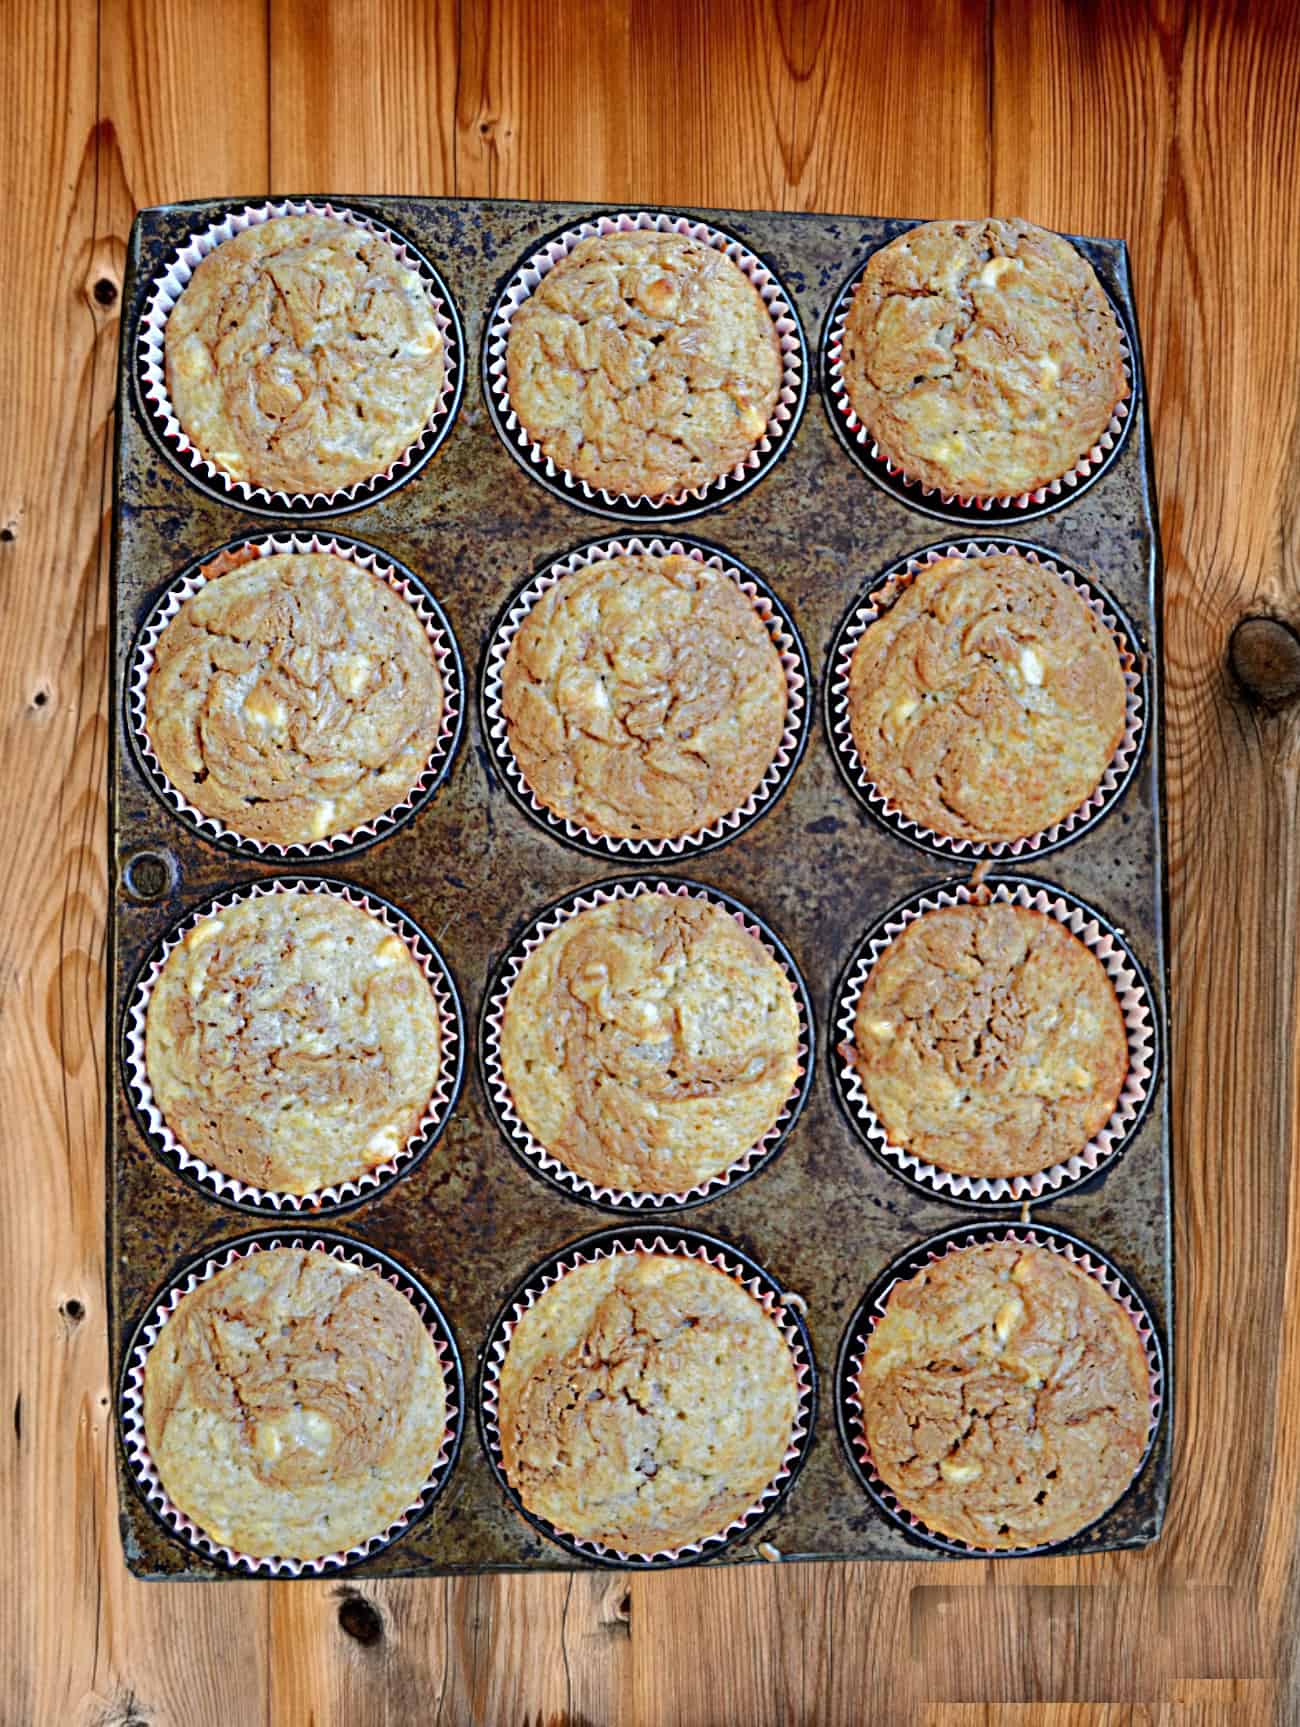 A muffin pan with 12 baked muffins. 